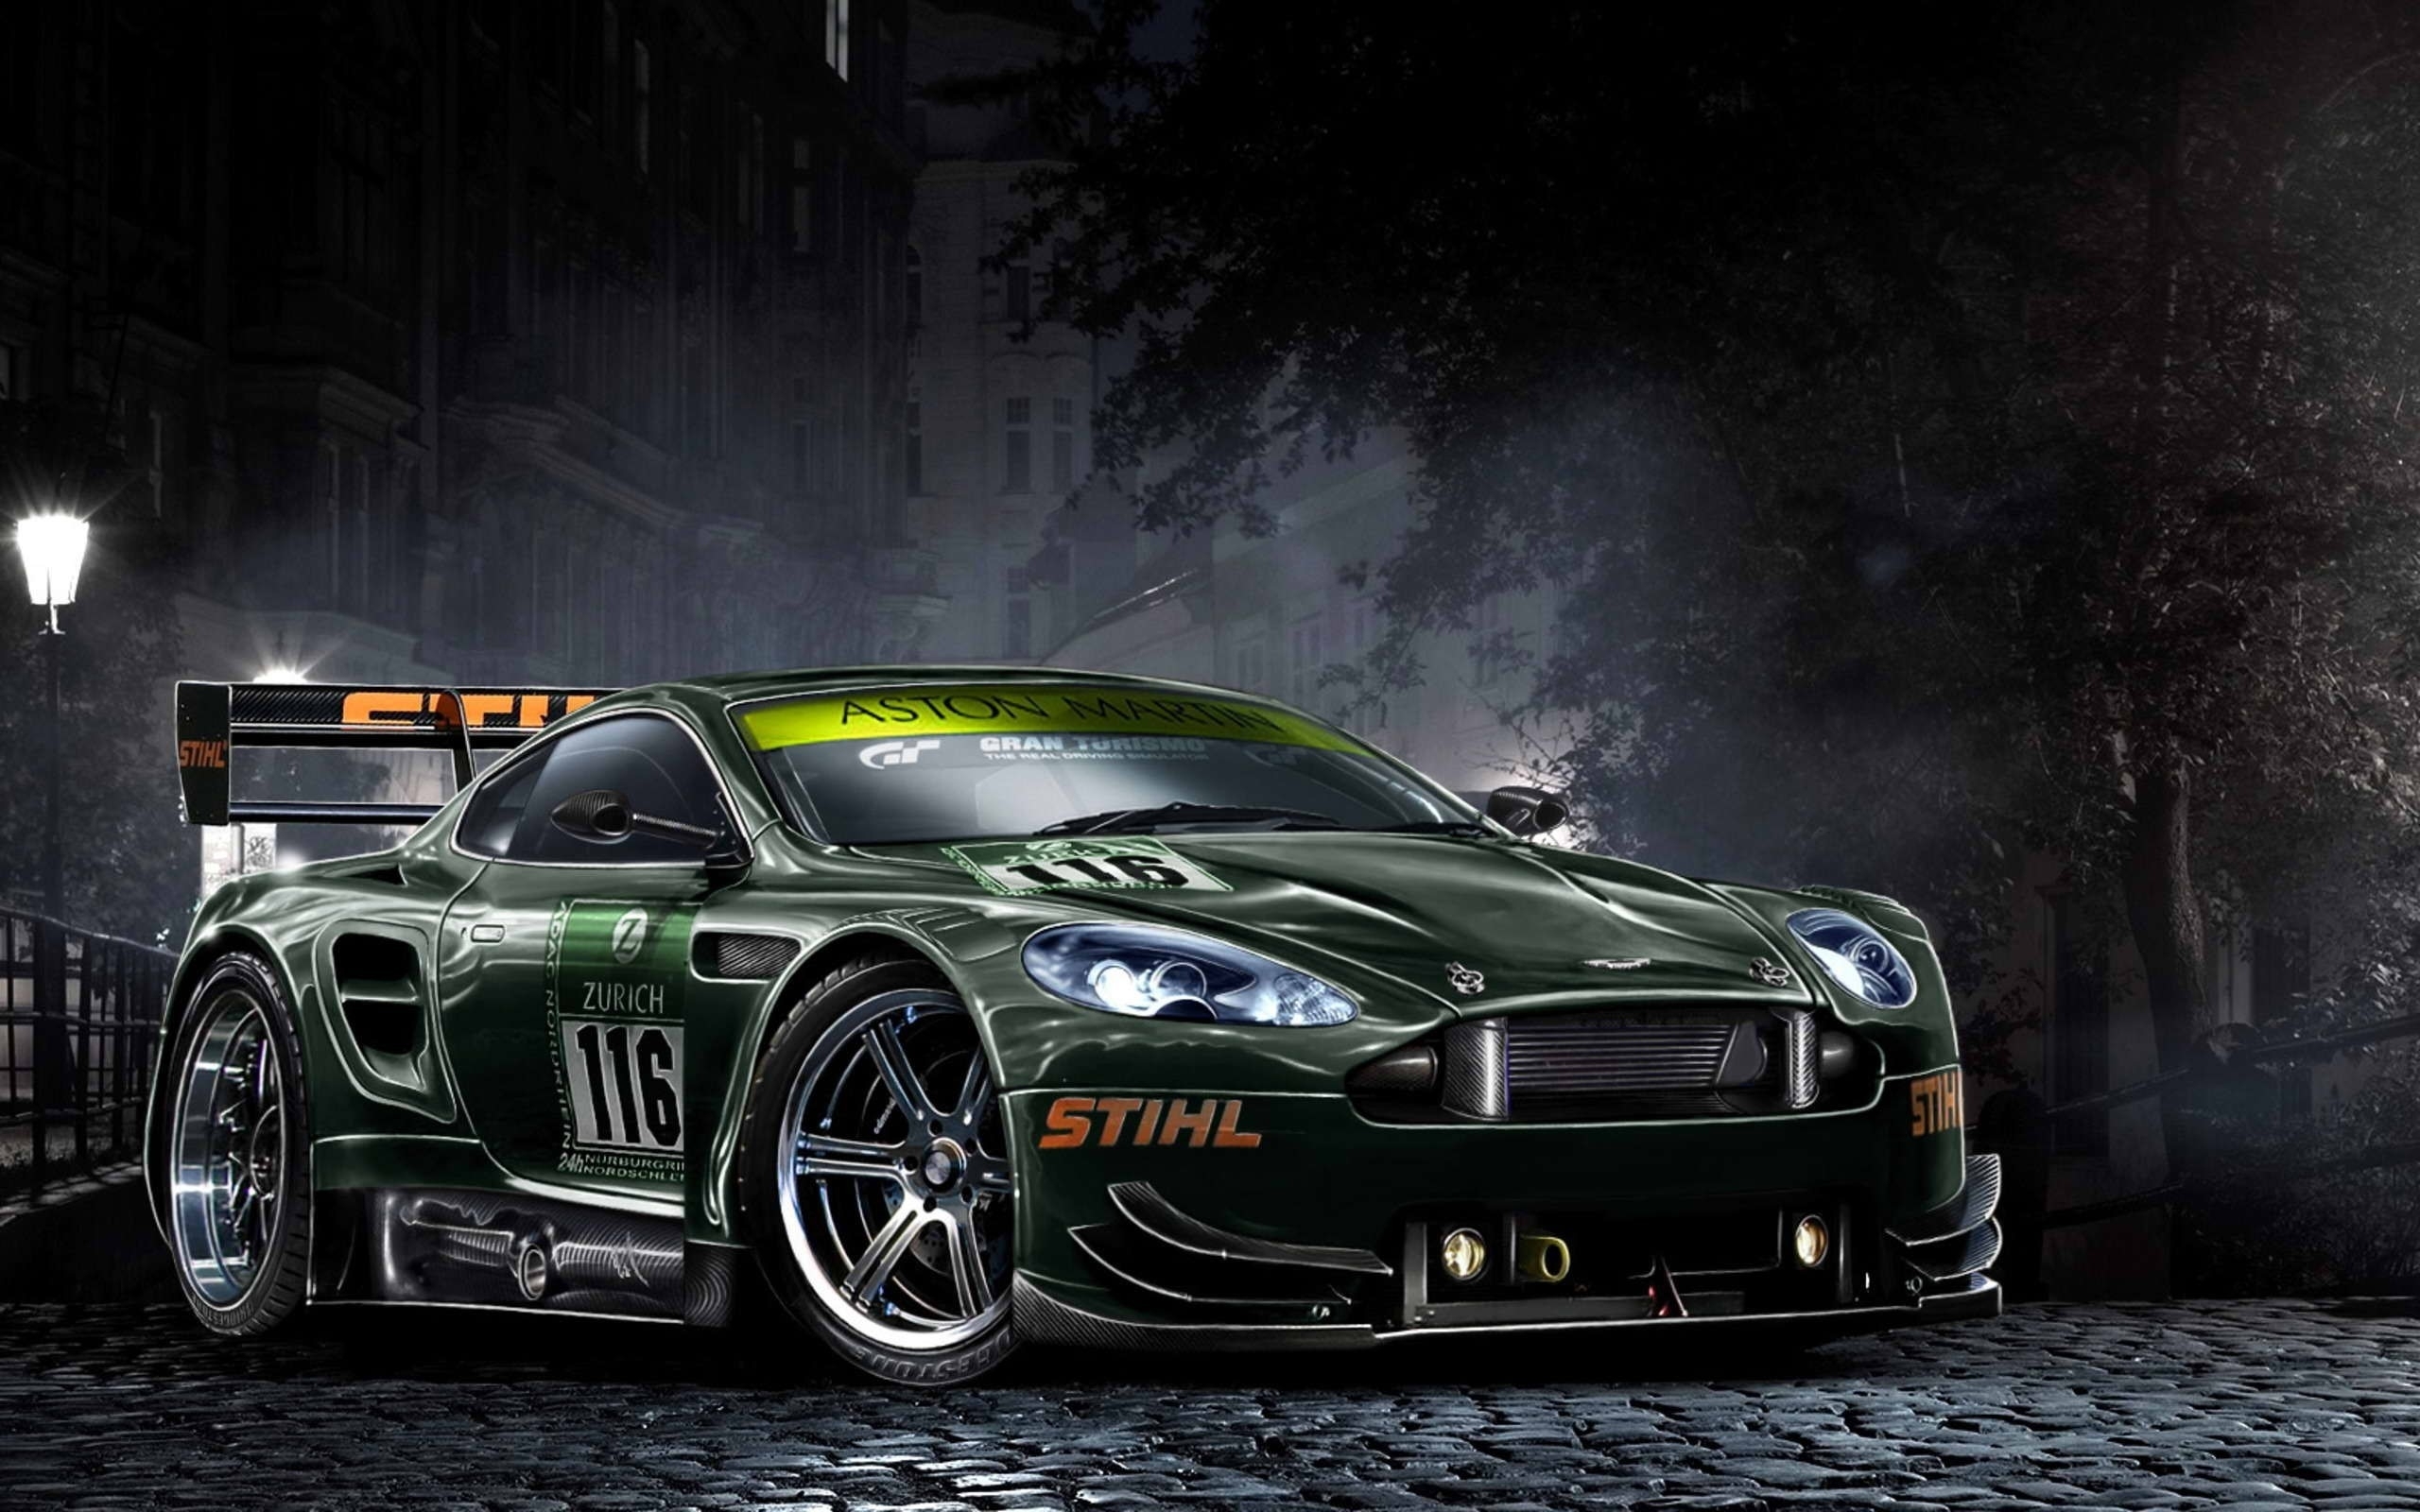 10 Latest Street Race Cars Wallpapers FULL HD 1920×1080 For PC